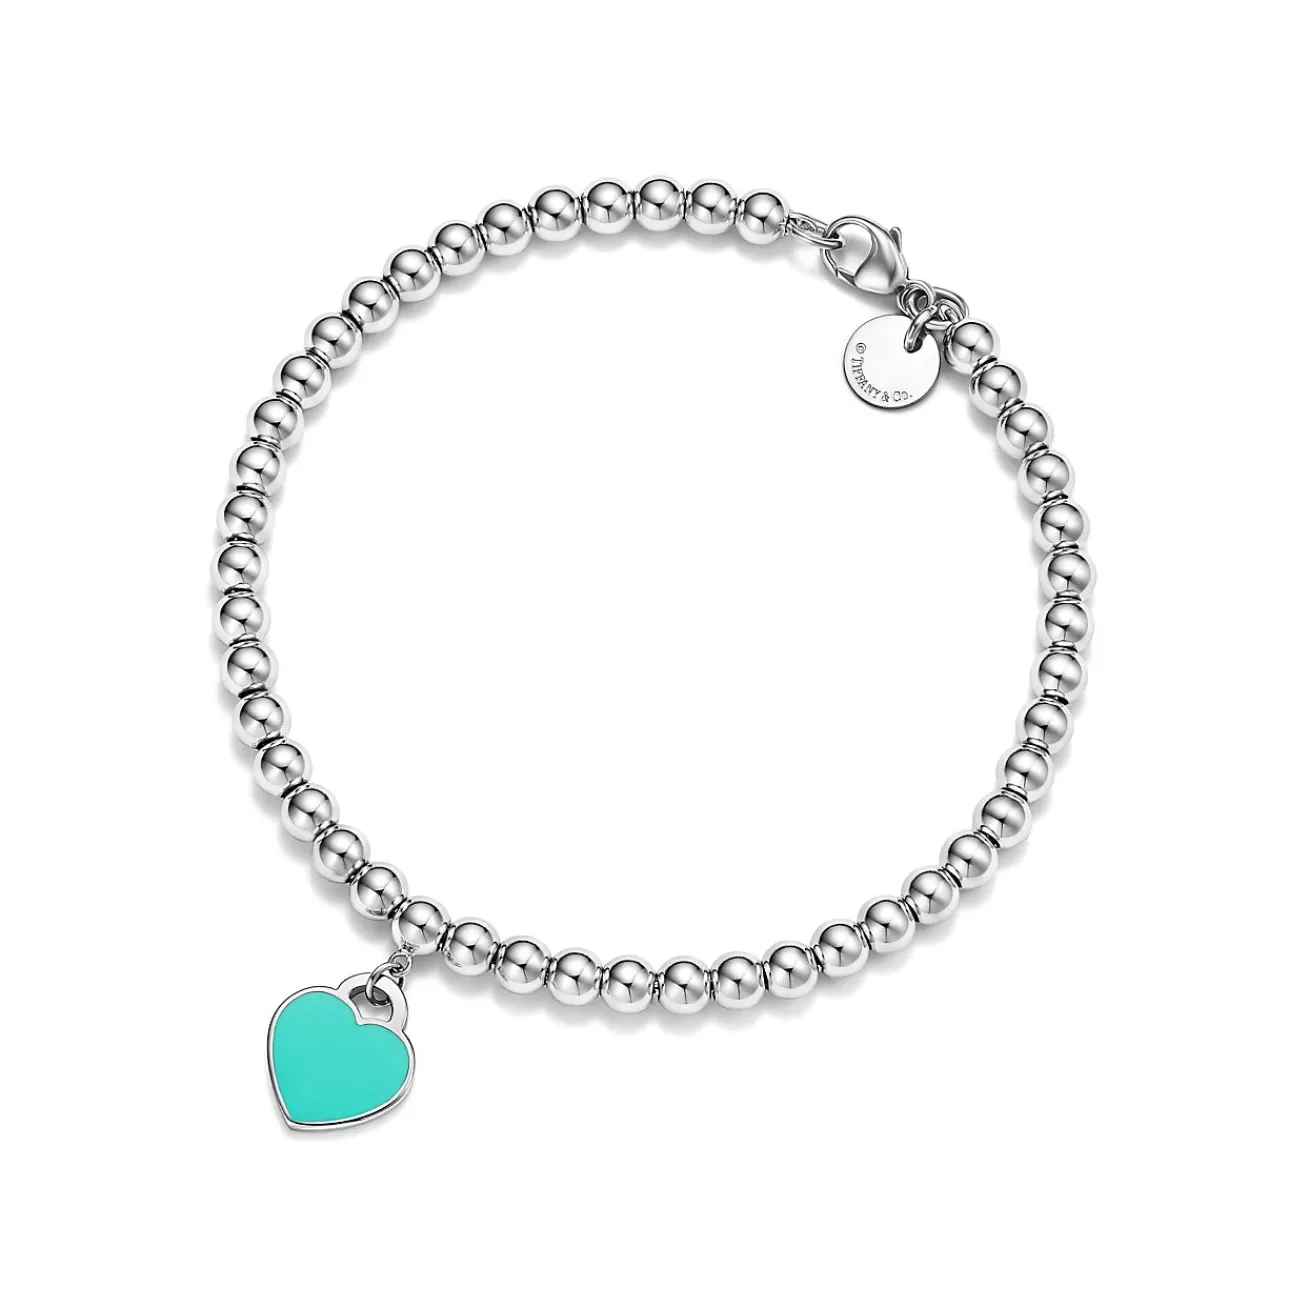 Tiffany & Co. Return to Tiffany® Bead Bracelet in Silver, Tiffany Blue® with a Diamond, 4 mm | ^ Bracelets | Gifts for Her